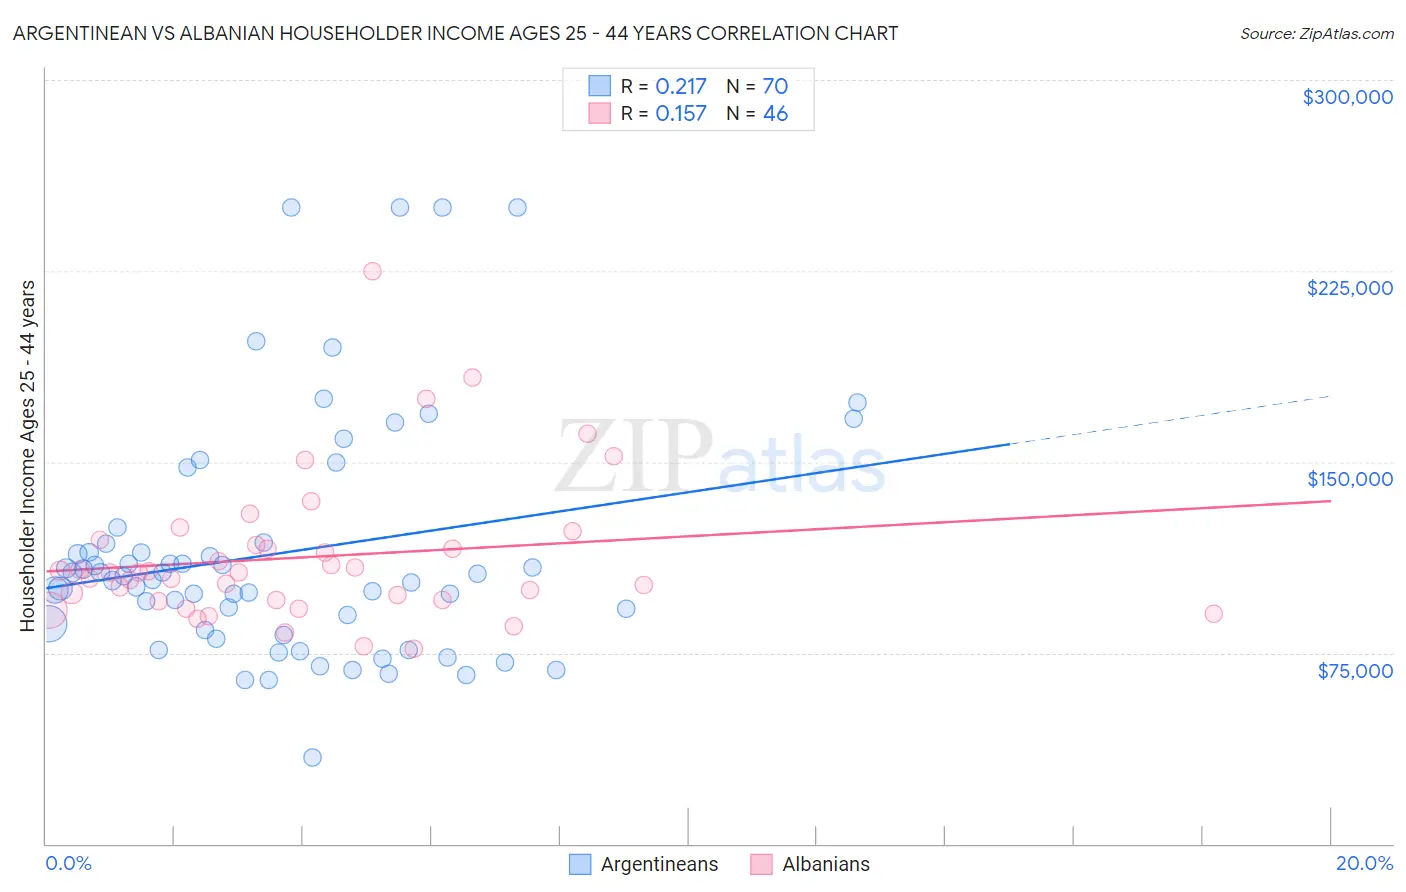 Argentinean vs Albanian Householder Income Ages 25 - 44 years